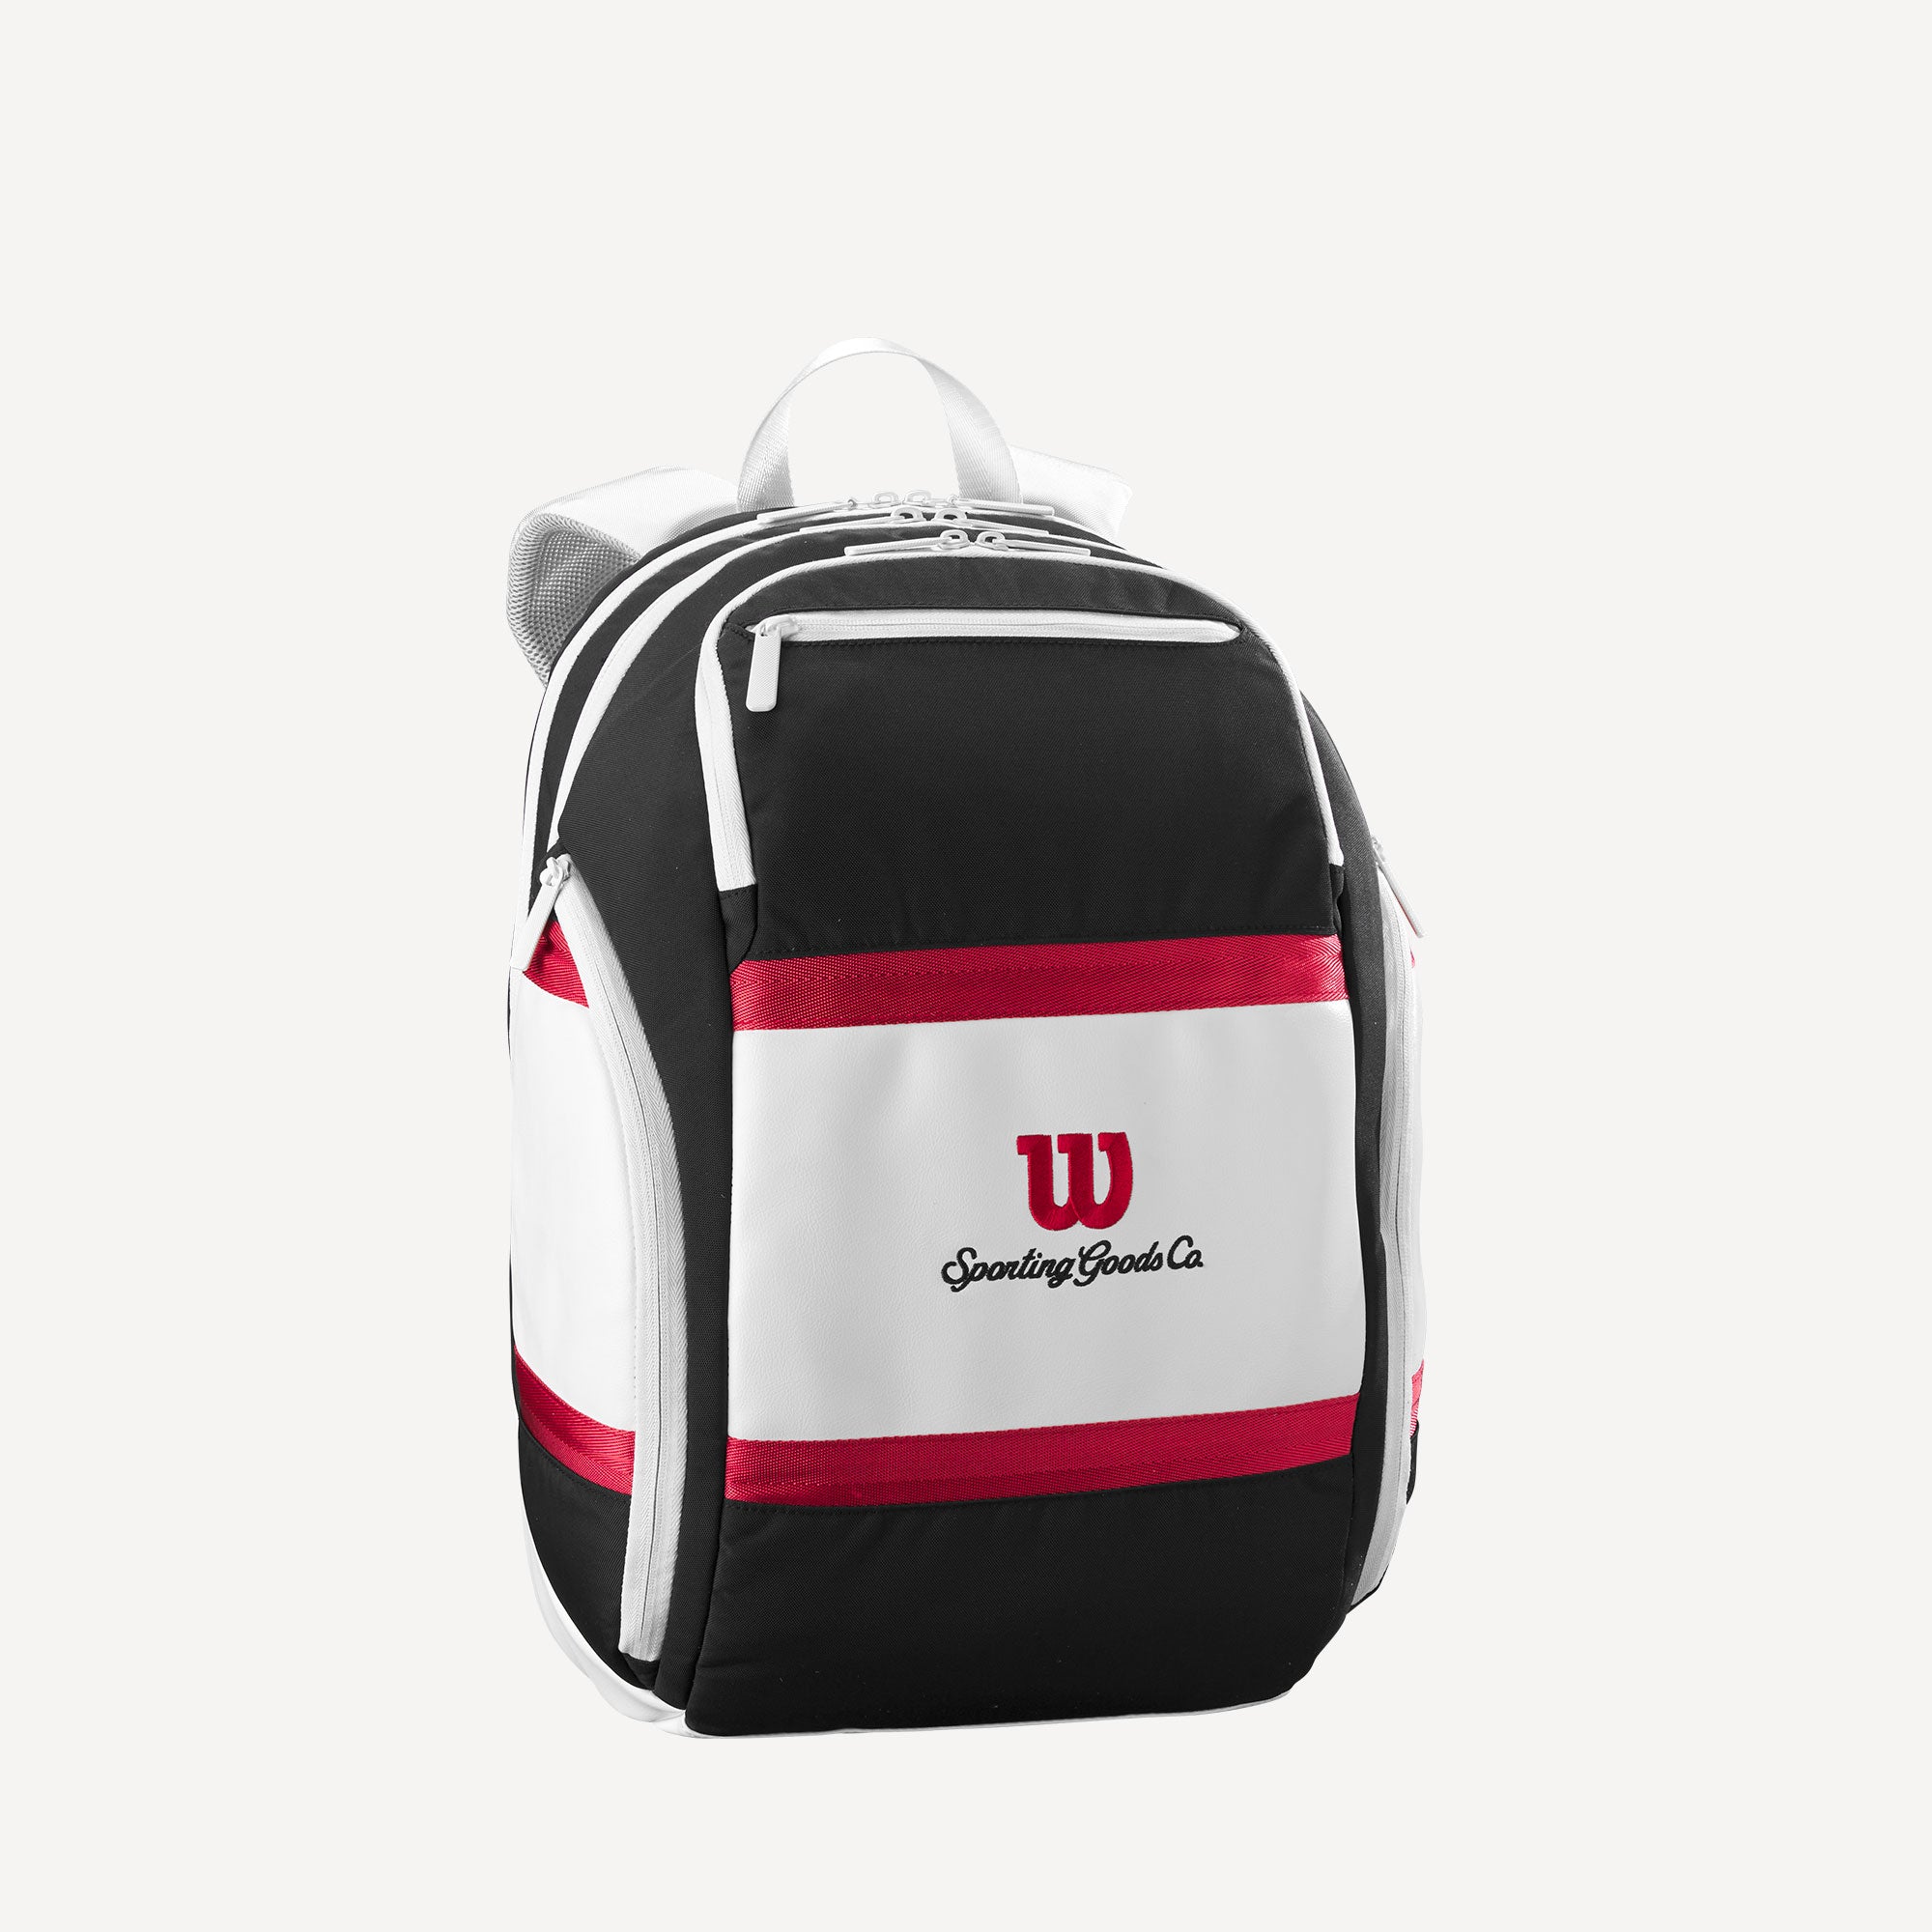 Wilson Courage Collection Tennis Backpack - Black/White/Red (1)